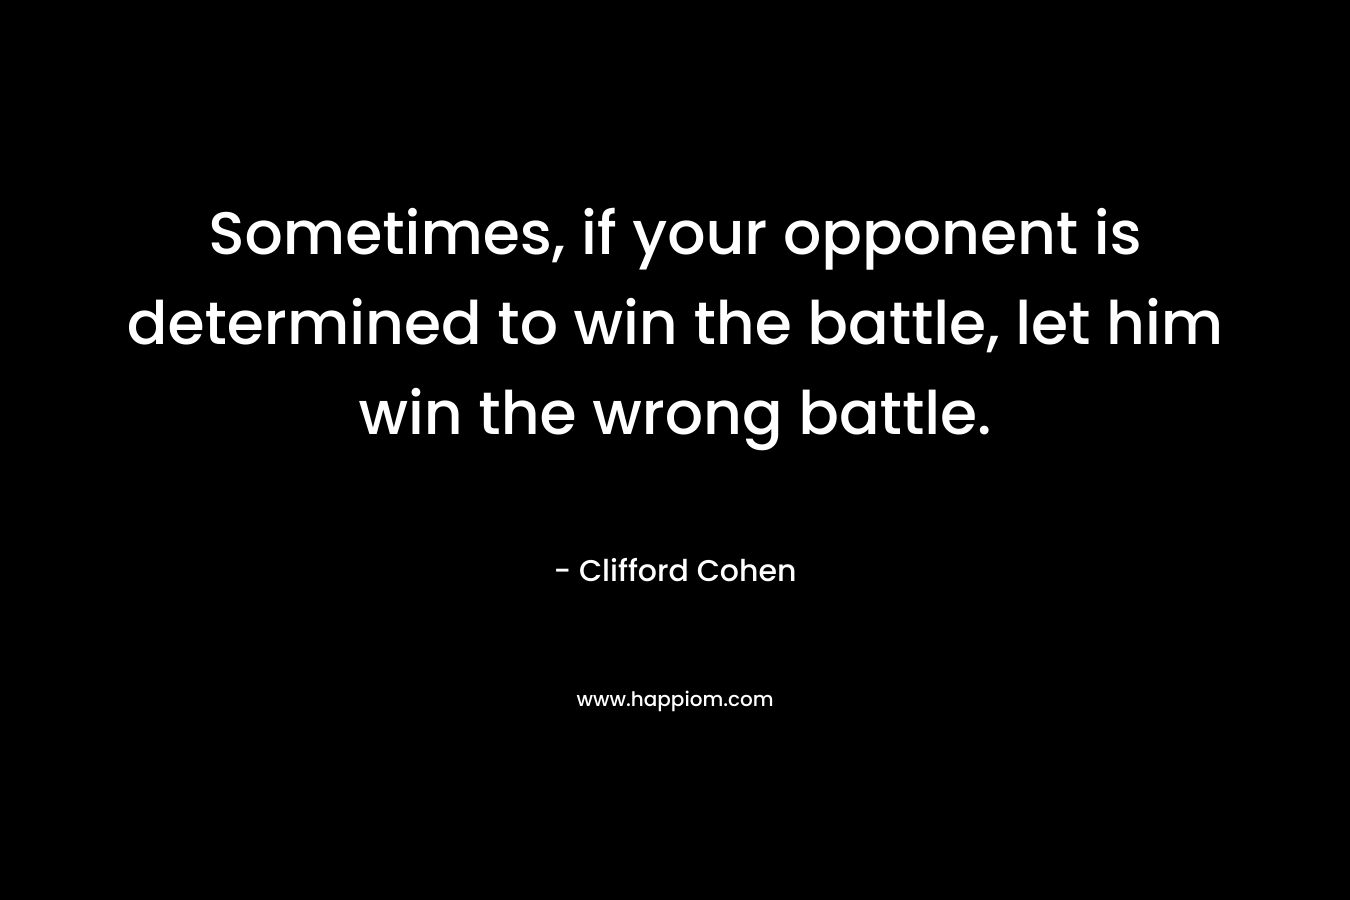 Sometimes, if your opponent is determined to win the battle, let him win the wrong battle.